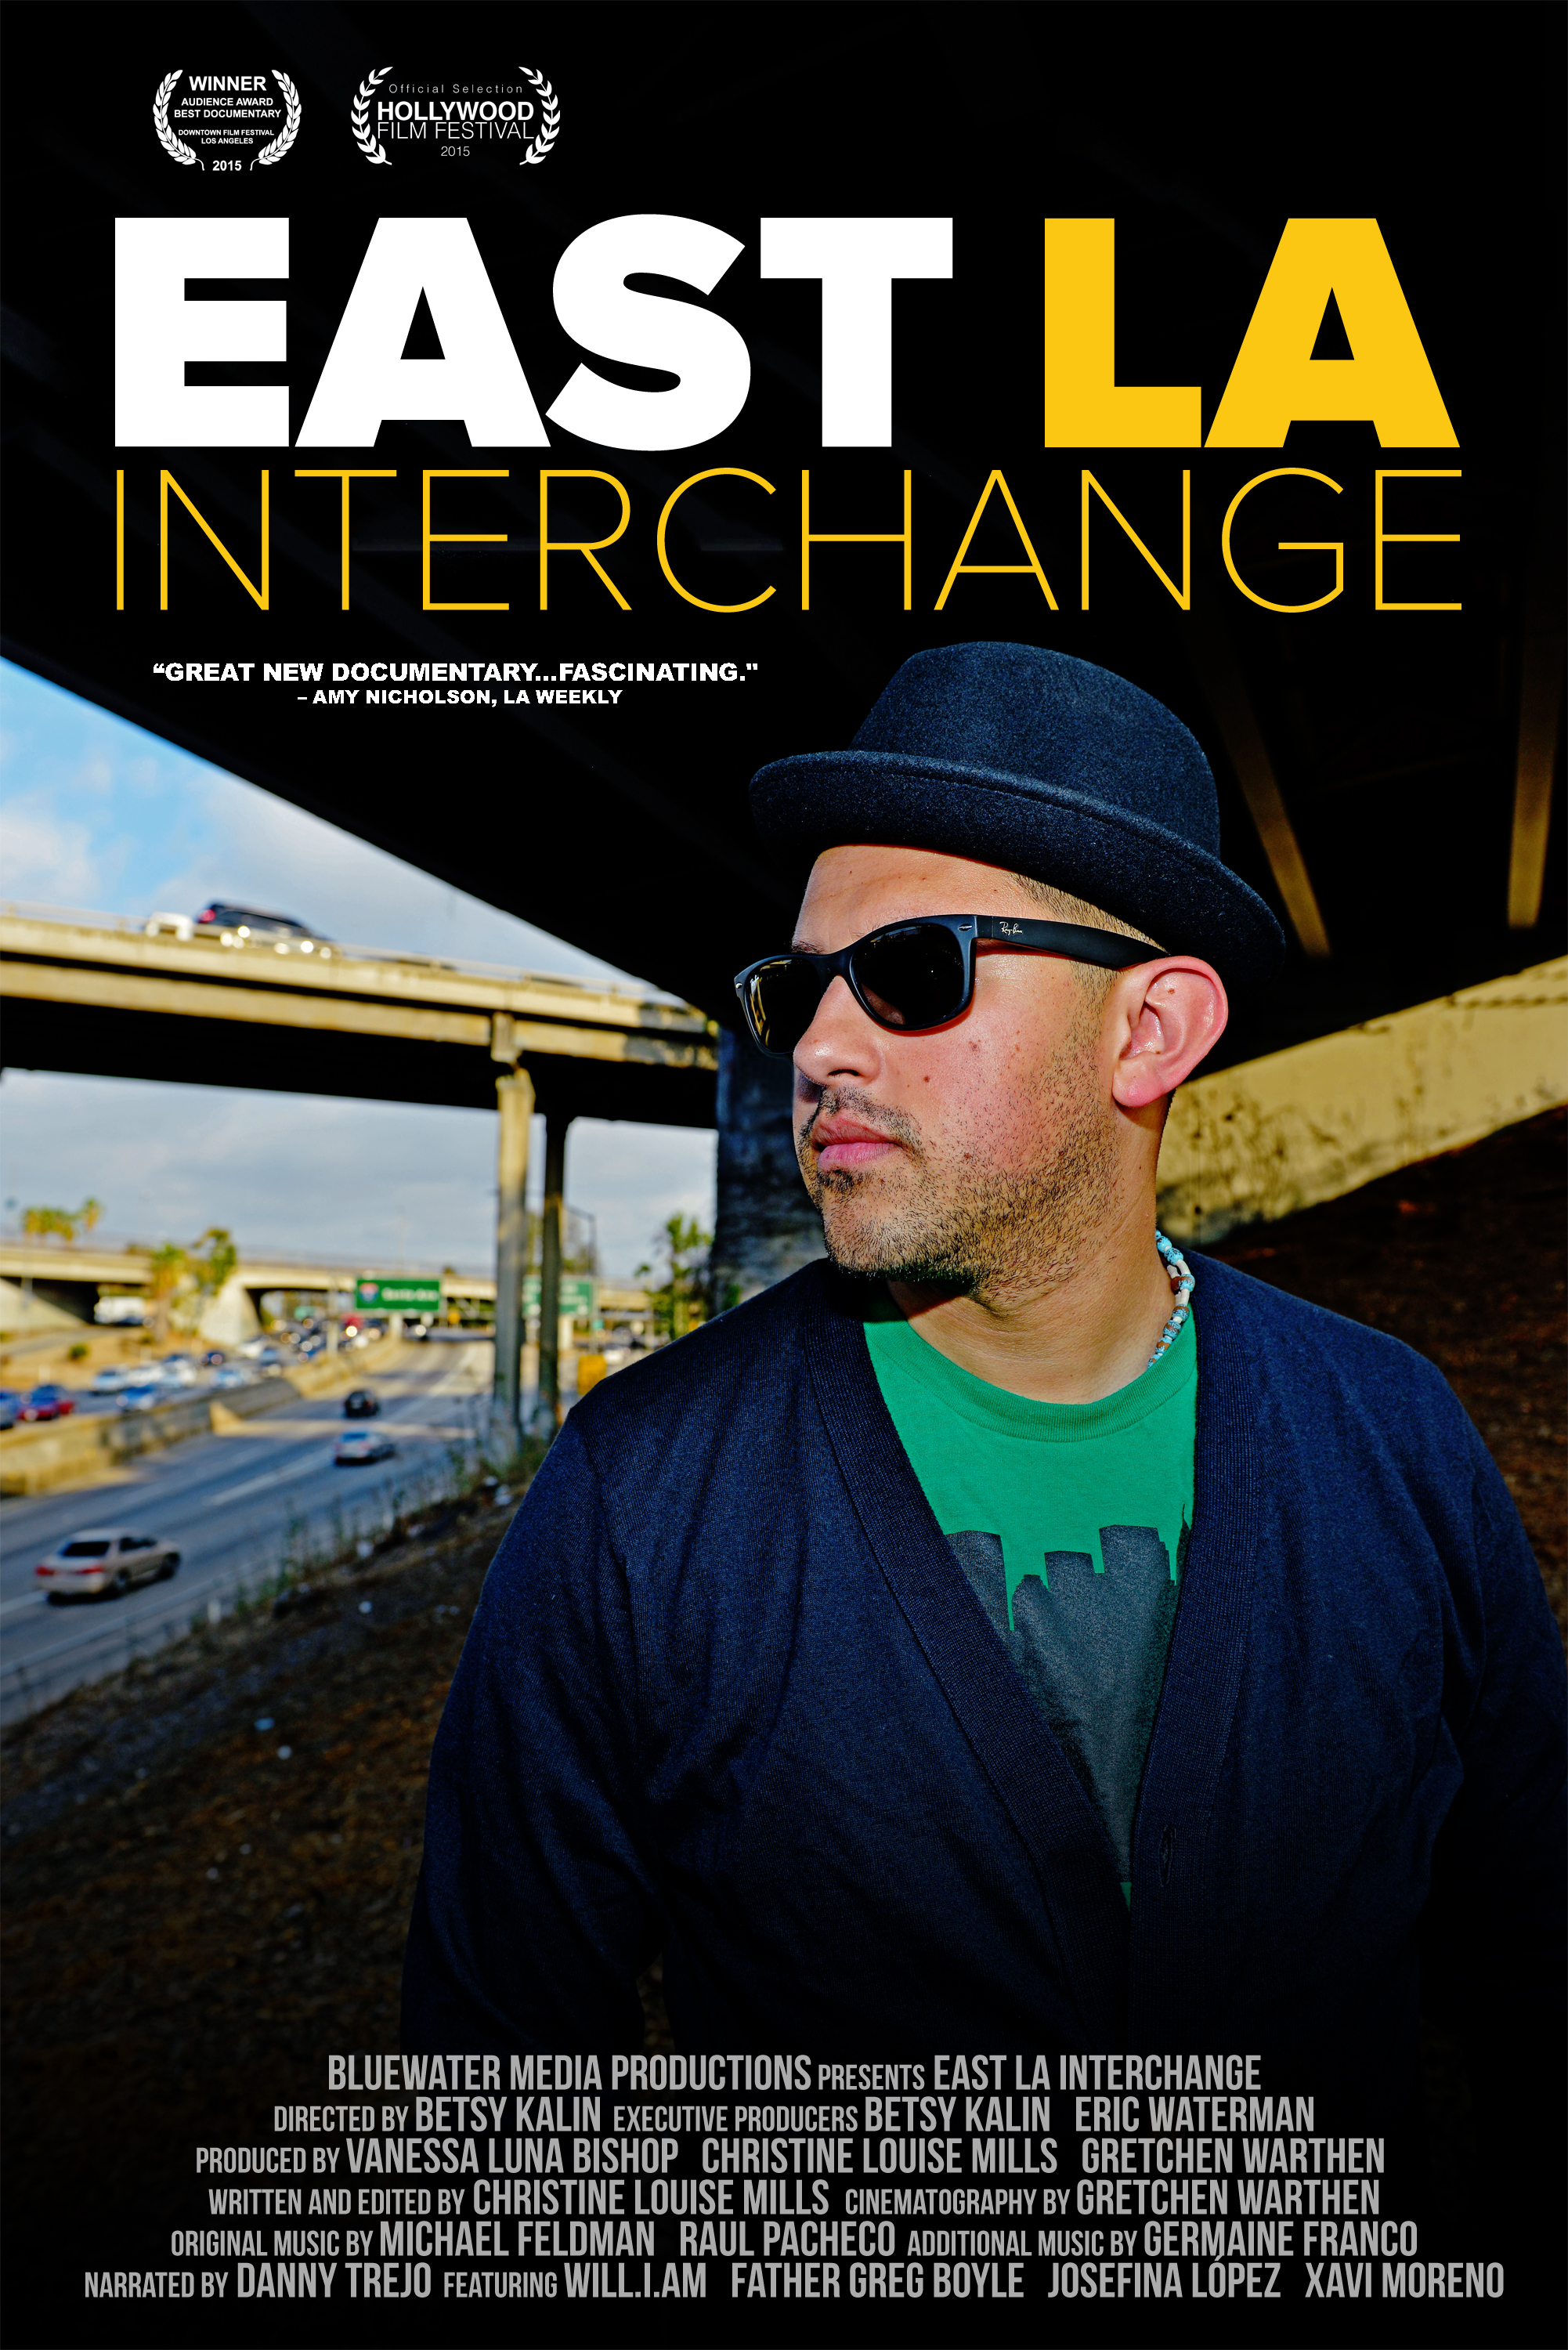 'East LA Interchange' directed by Betsy Kalin Photo by Chris Chew